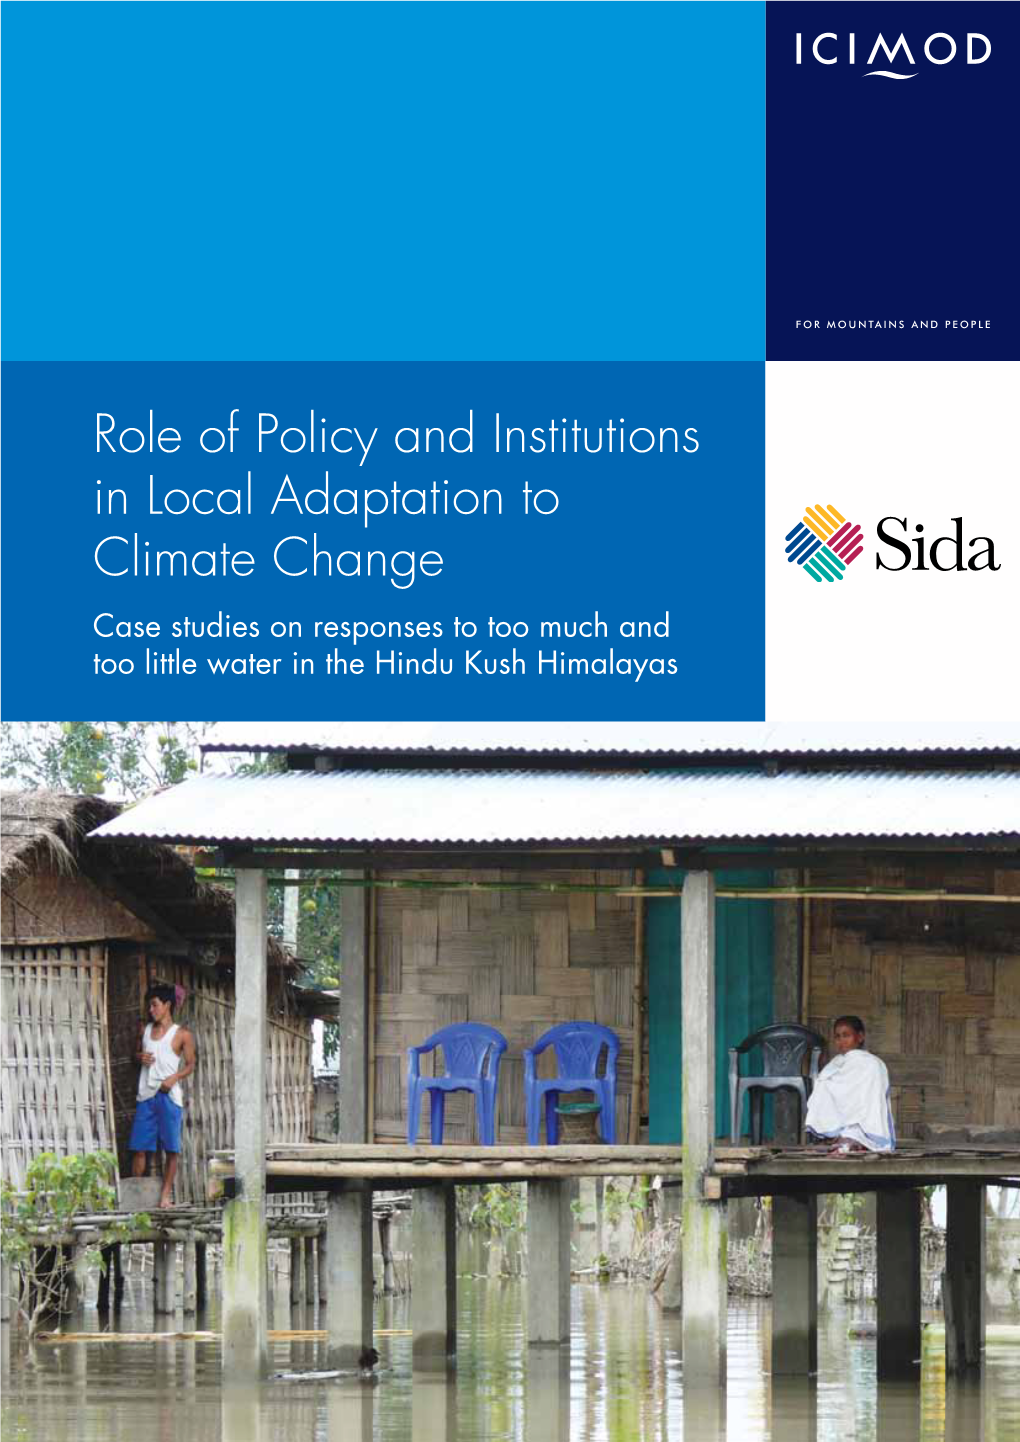 Role of Policy and Institutions in Local Adaptation to Climate Change